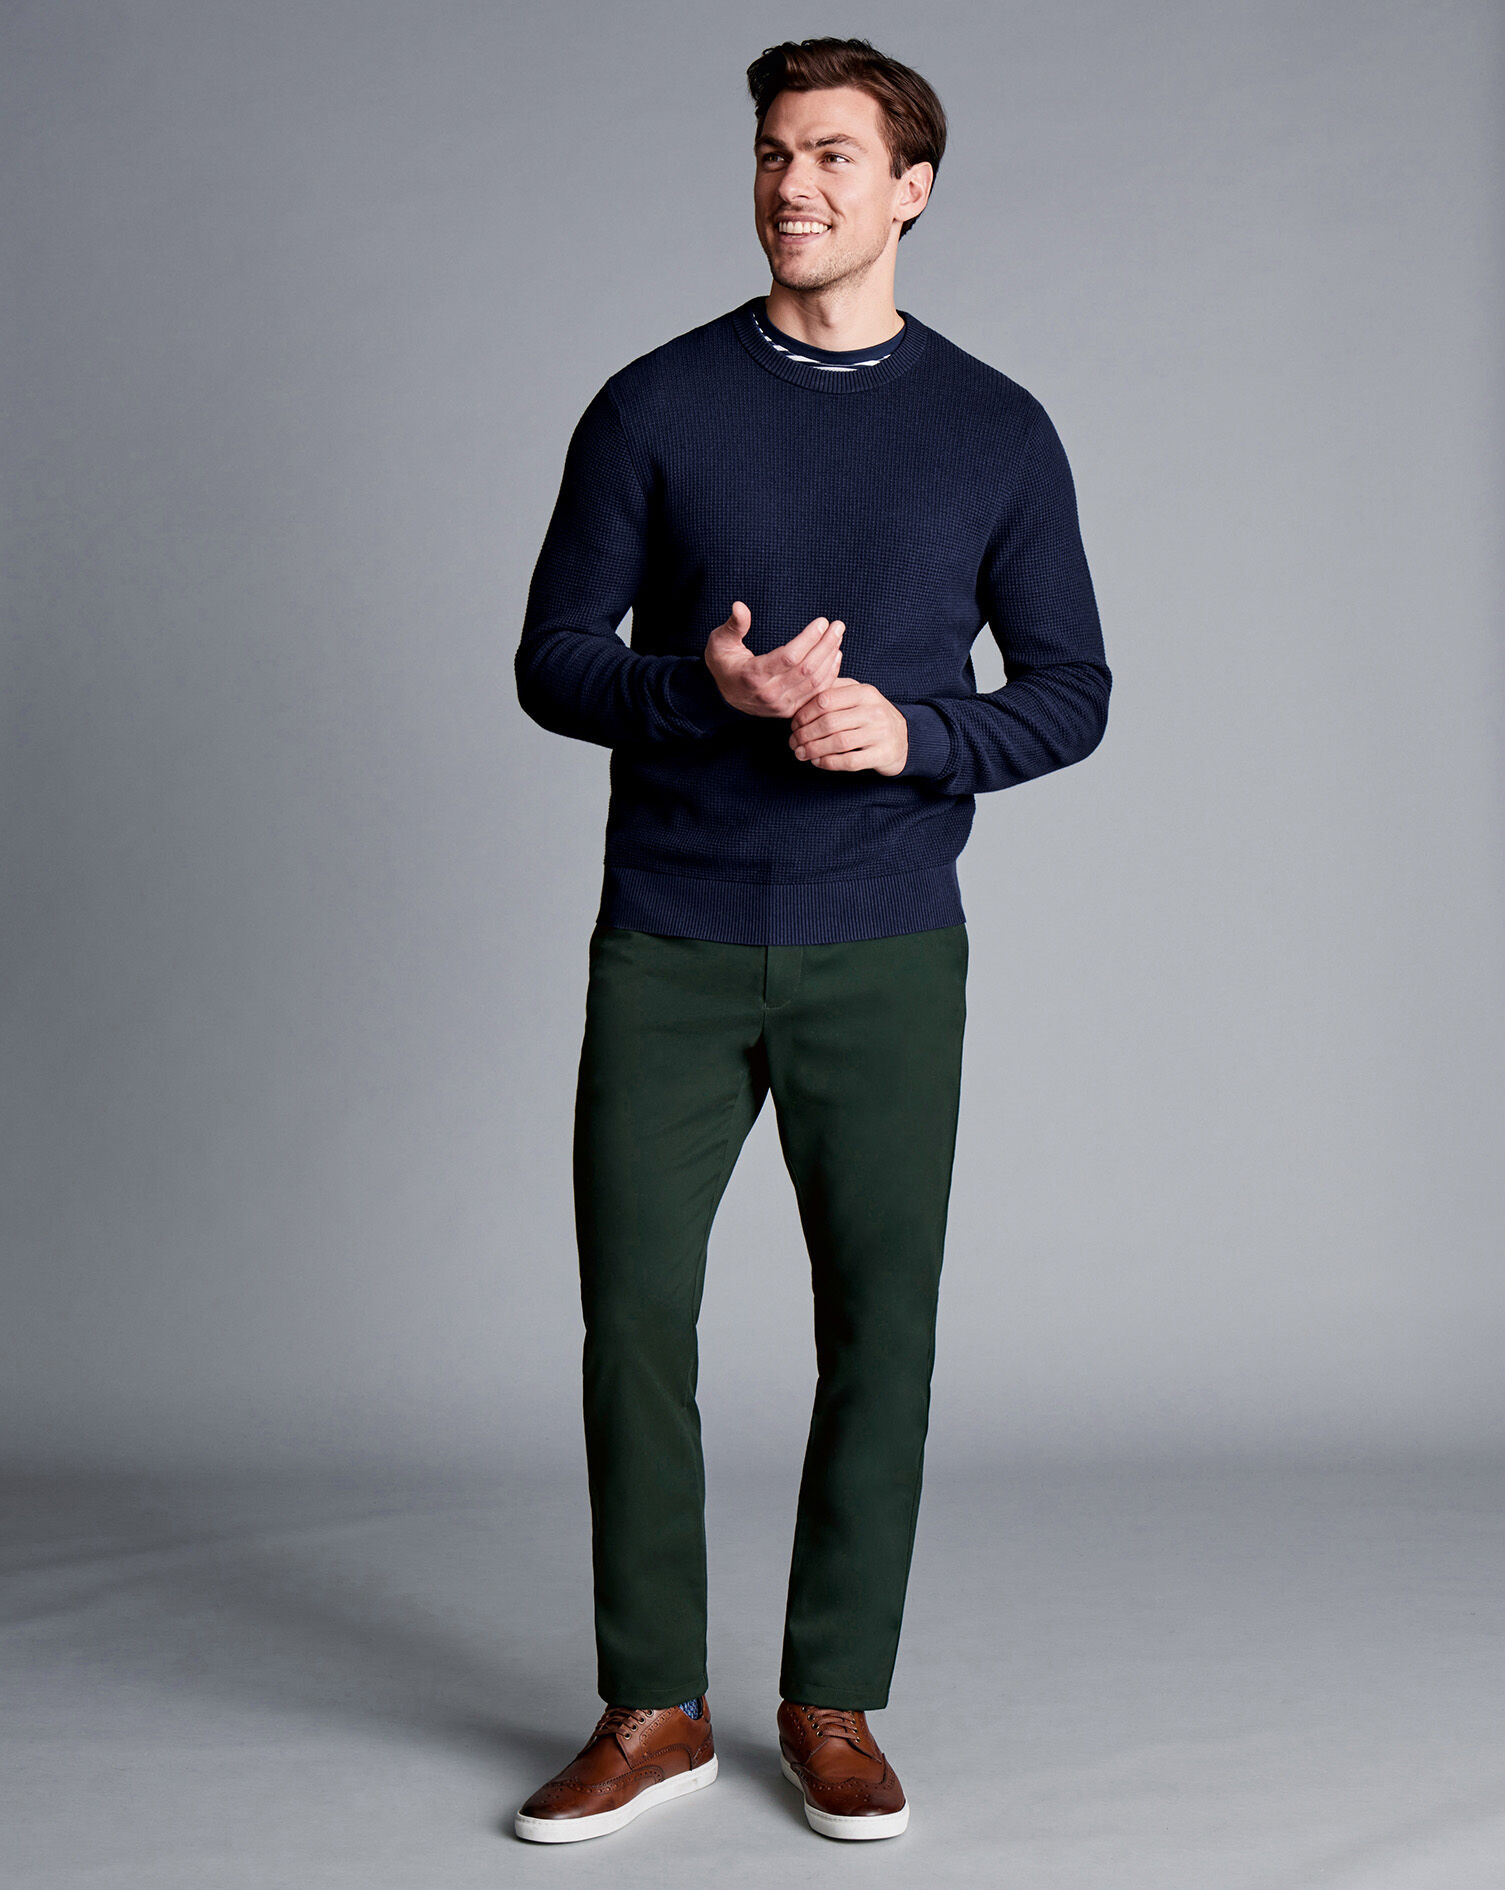 Green Pants with White Shirt Outfits For Men 61 ideas  outfits   Lookastic